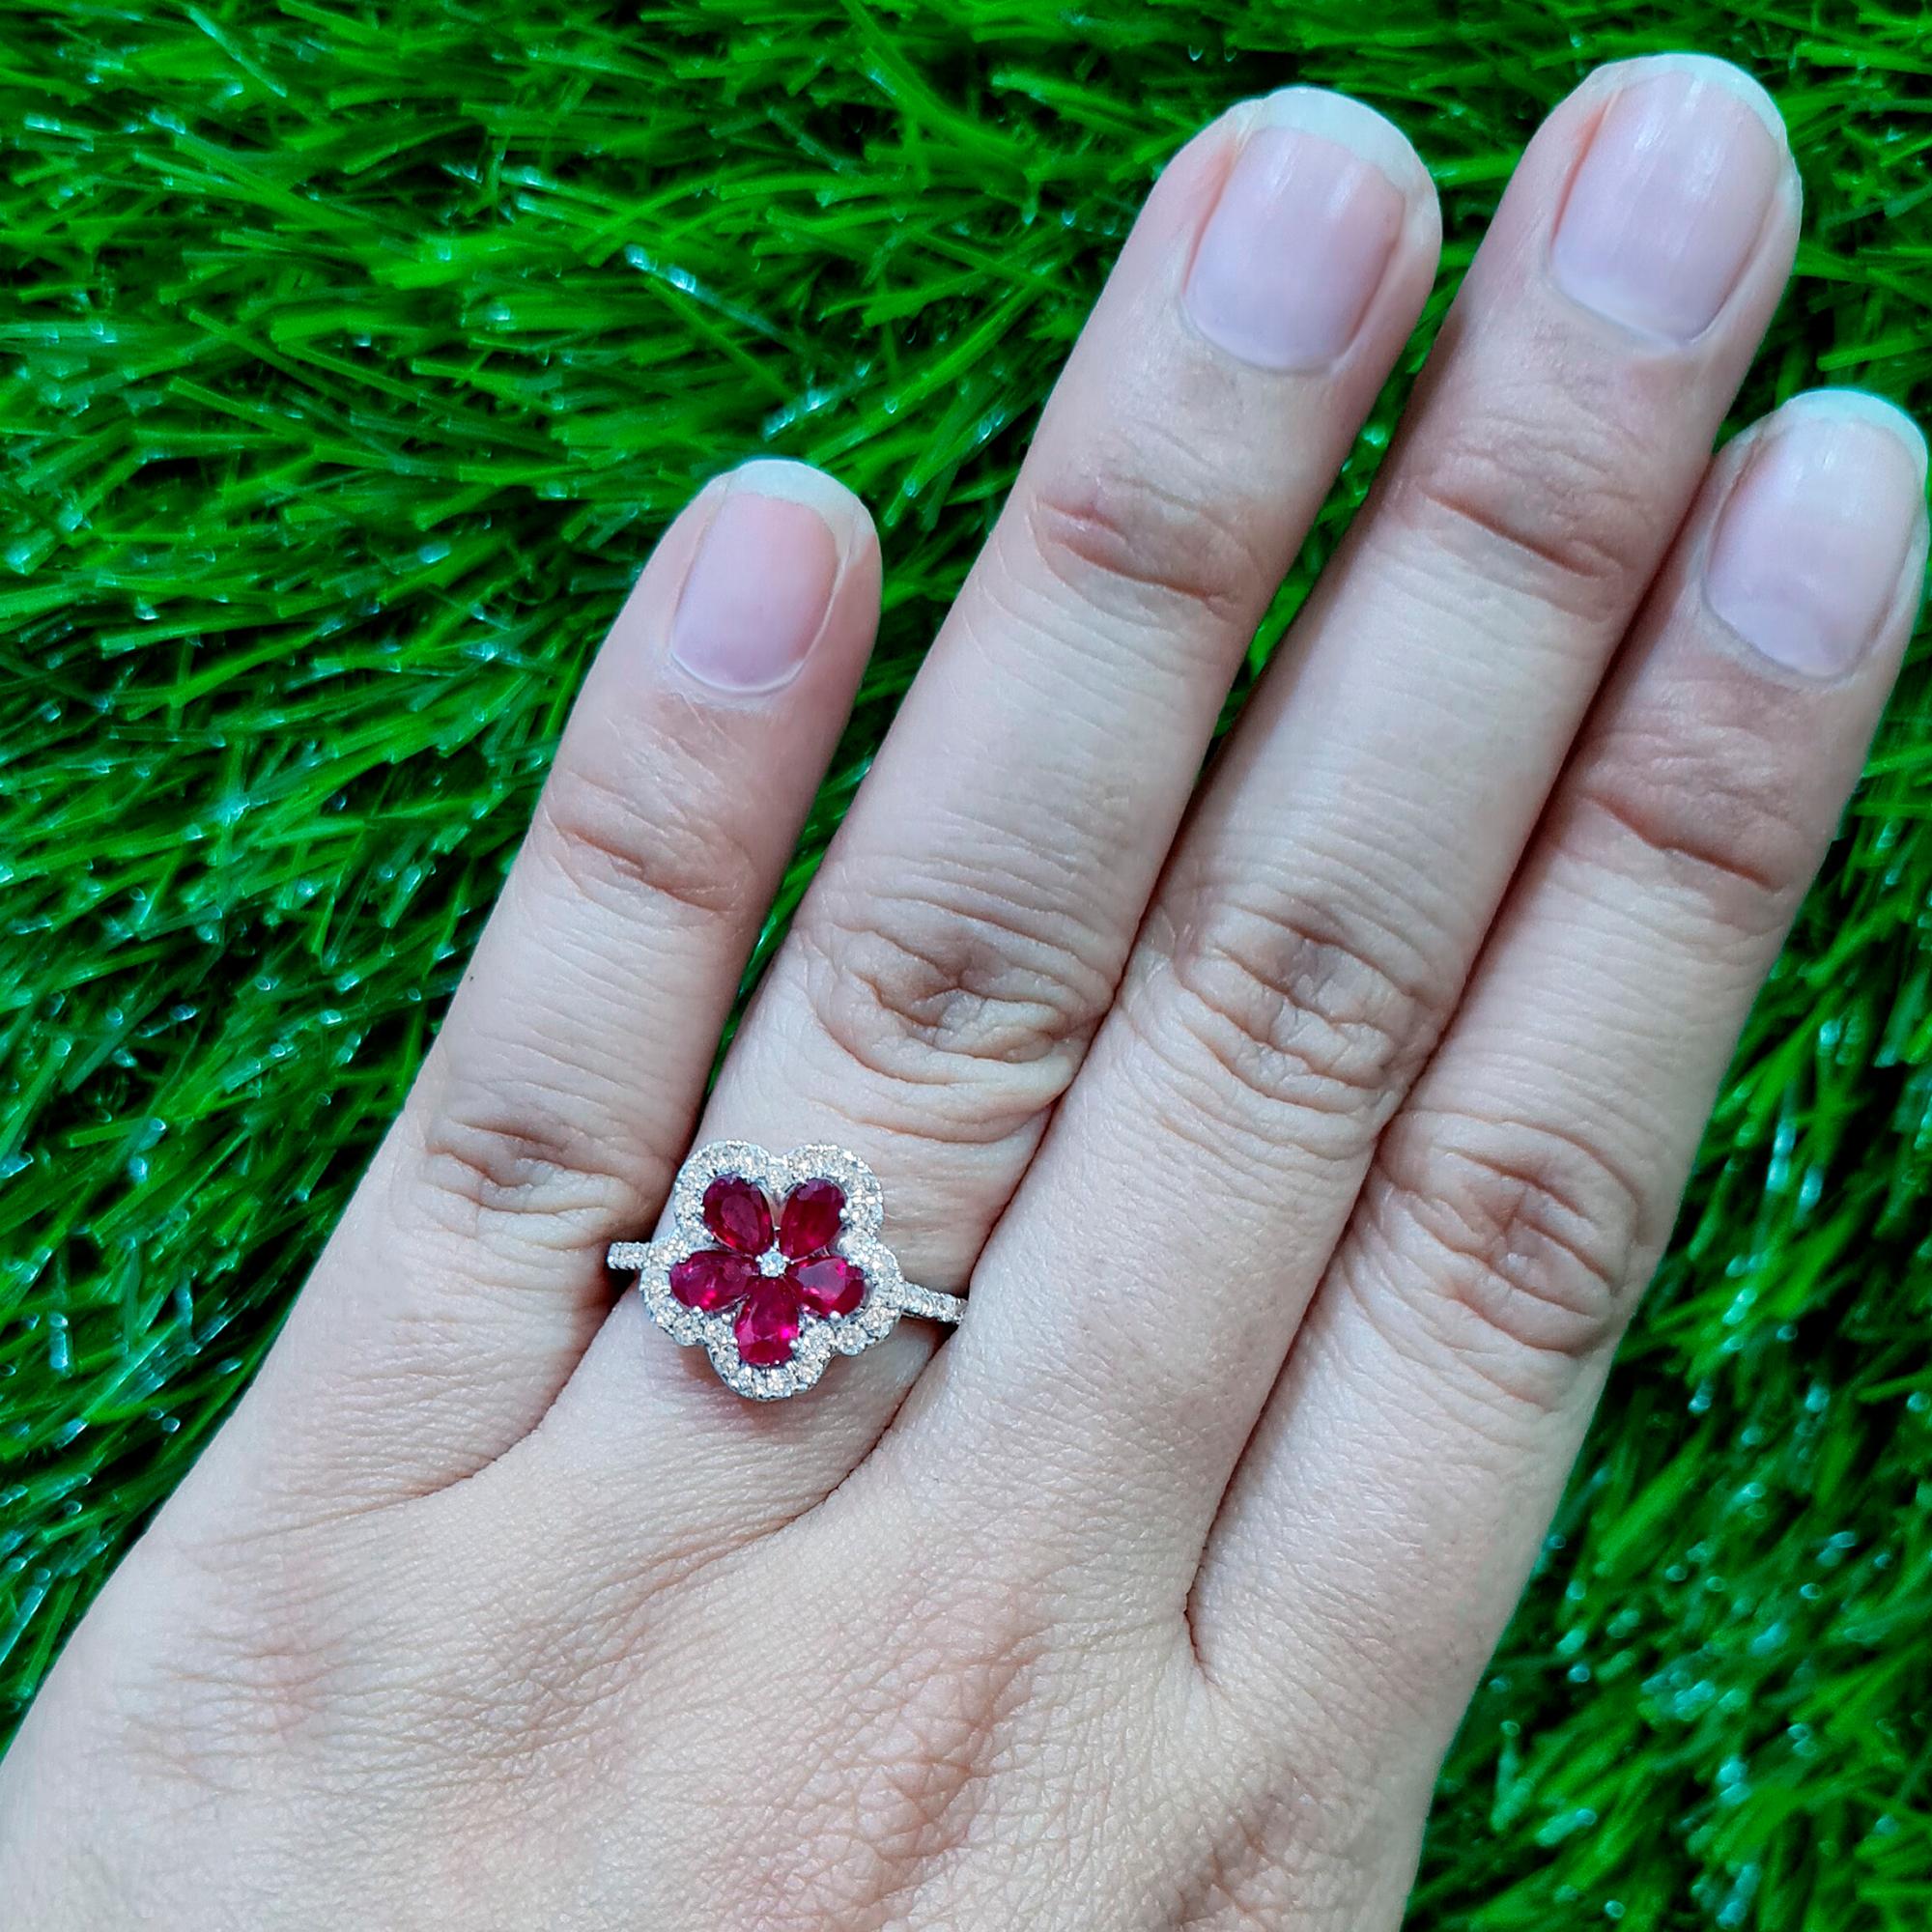 It comes with the Gemological Appraisal by GIA GG/AJP
All Gemstones are Natural
Pear Rubies = 1.13 Carats
Round Diamonds = 0.42 Carats
Metal: 18K White Gold
Ring Size: 7* US
*It can be resized complimentary
